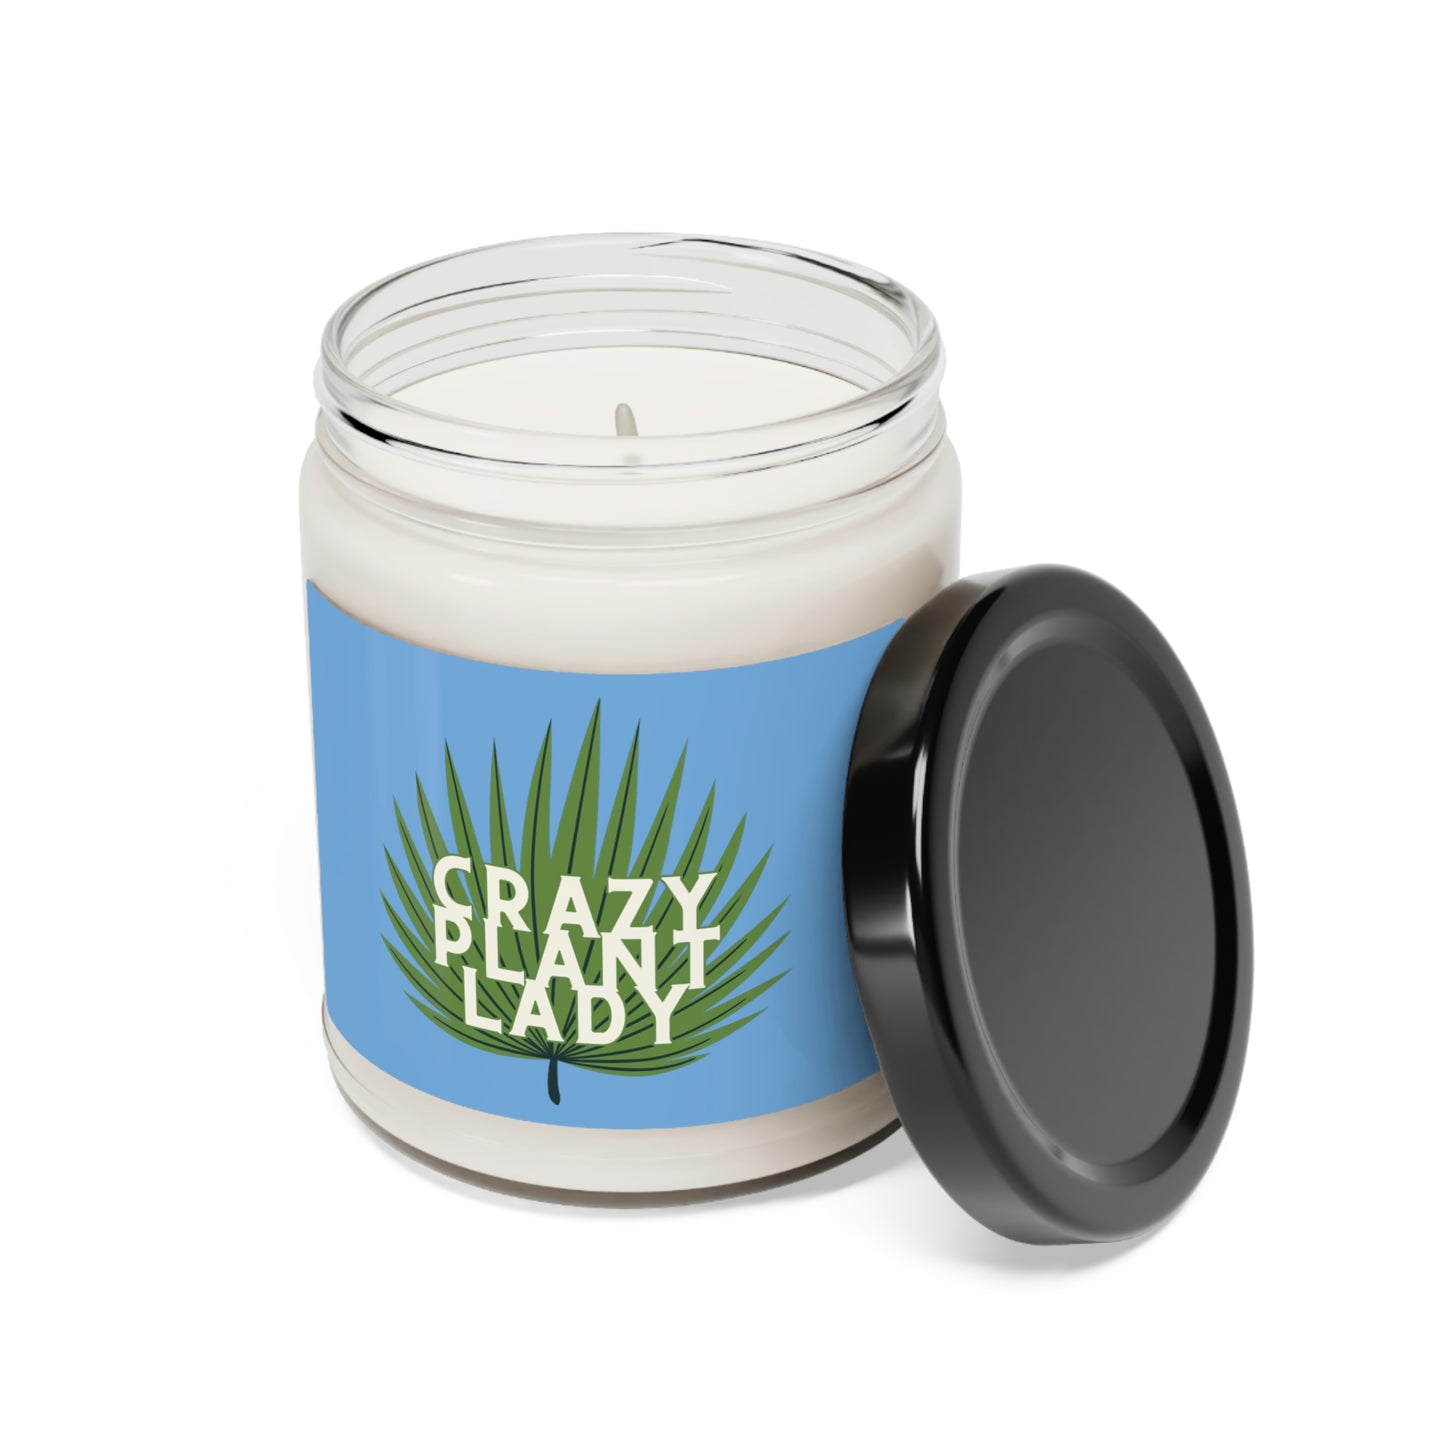 Crazy Plant Lady Soy Candle